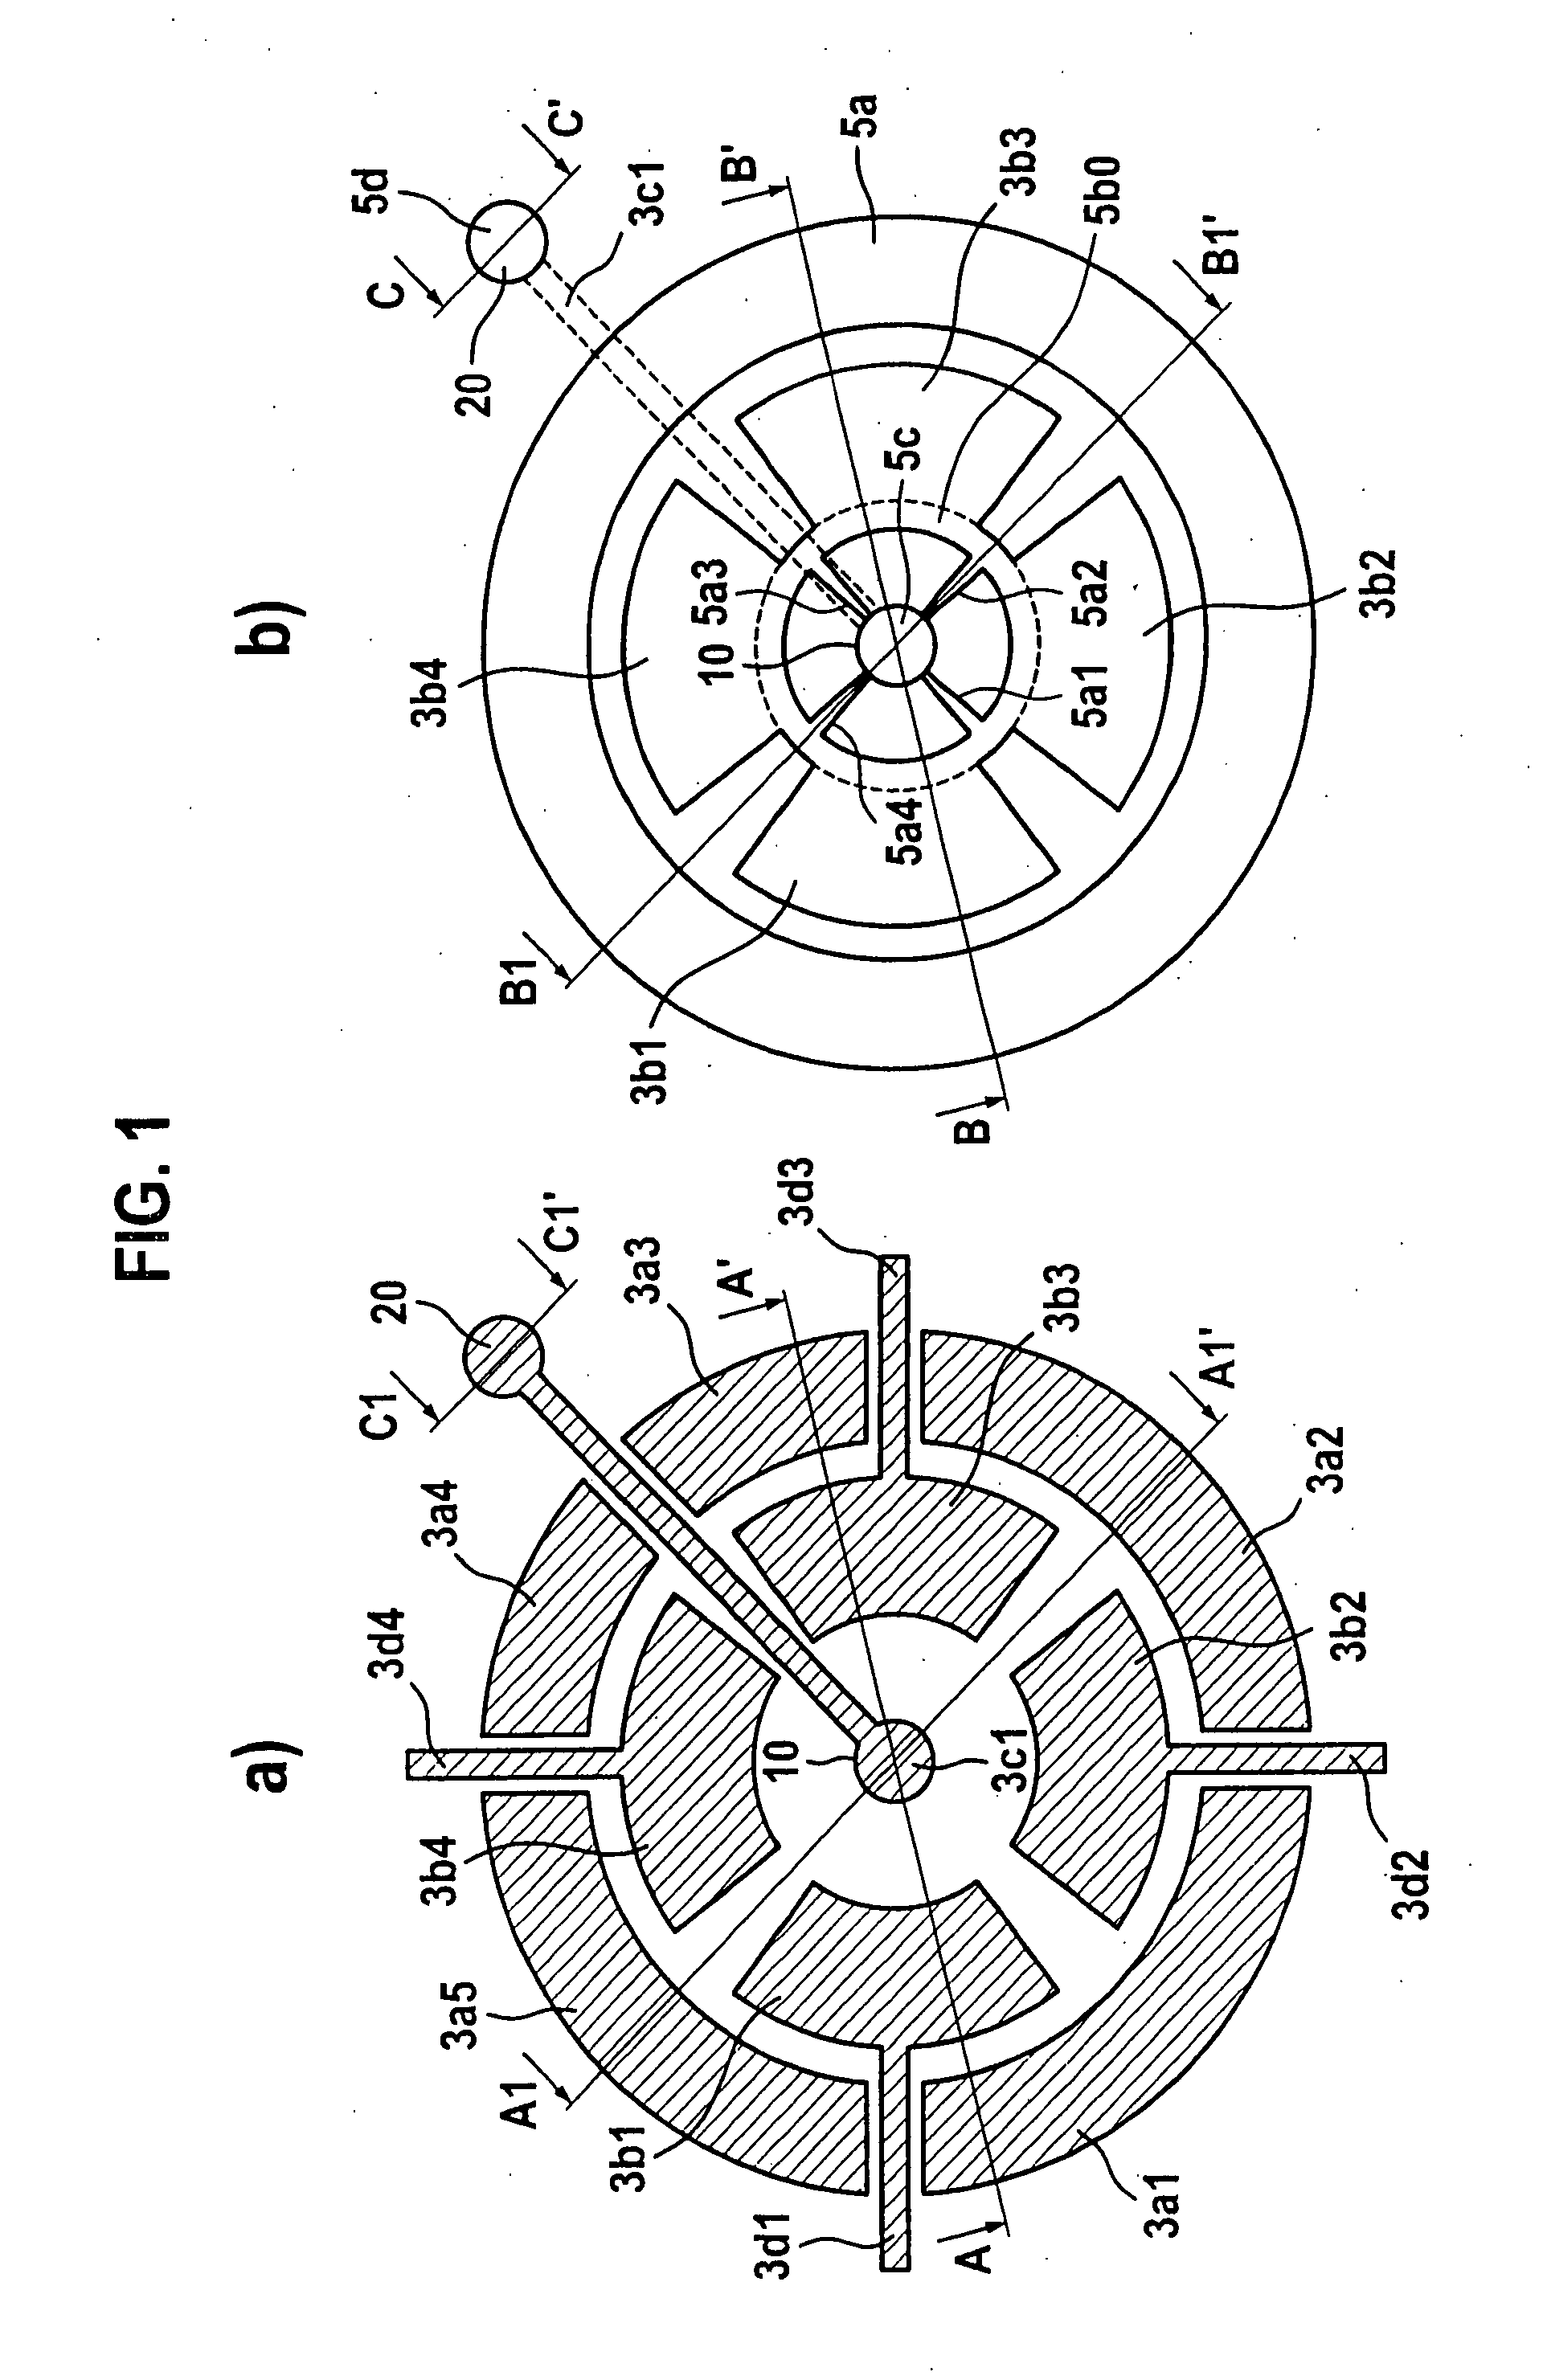 Micromechanical component and corresponding manufacturing method